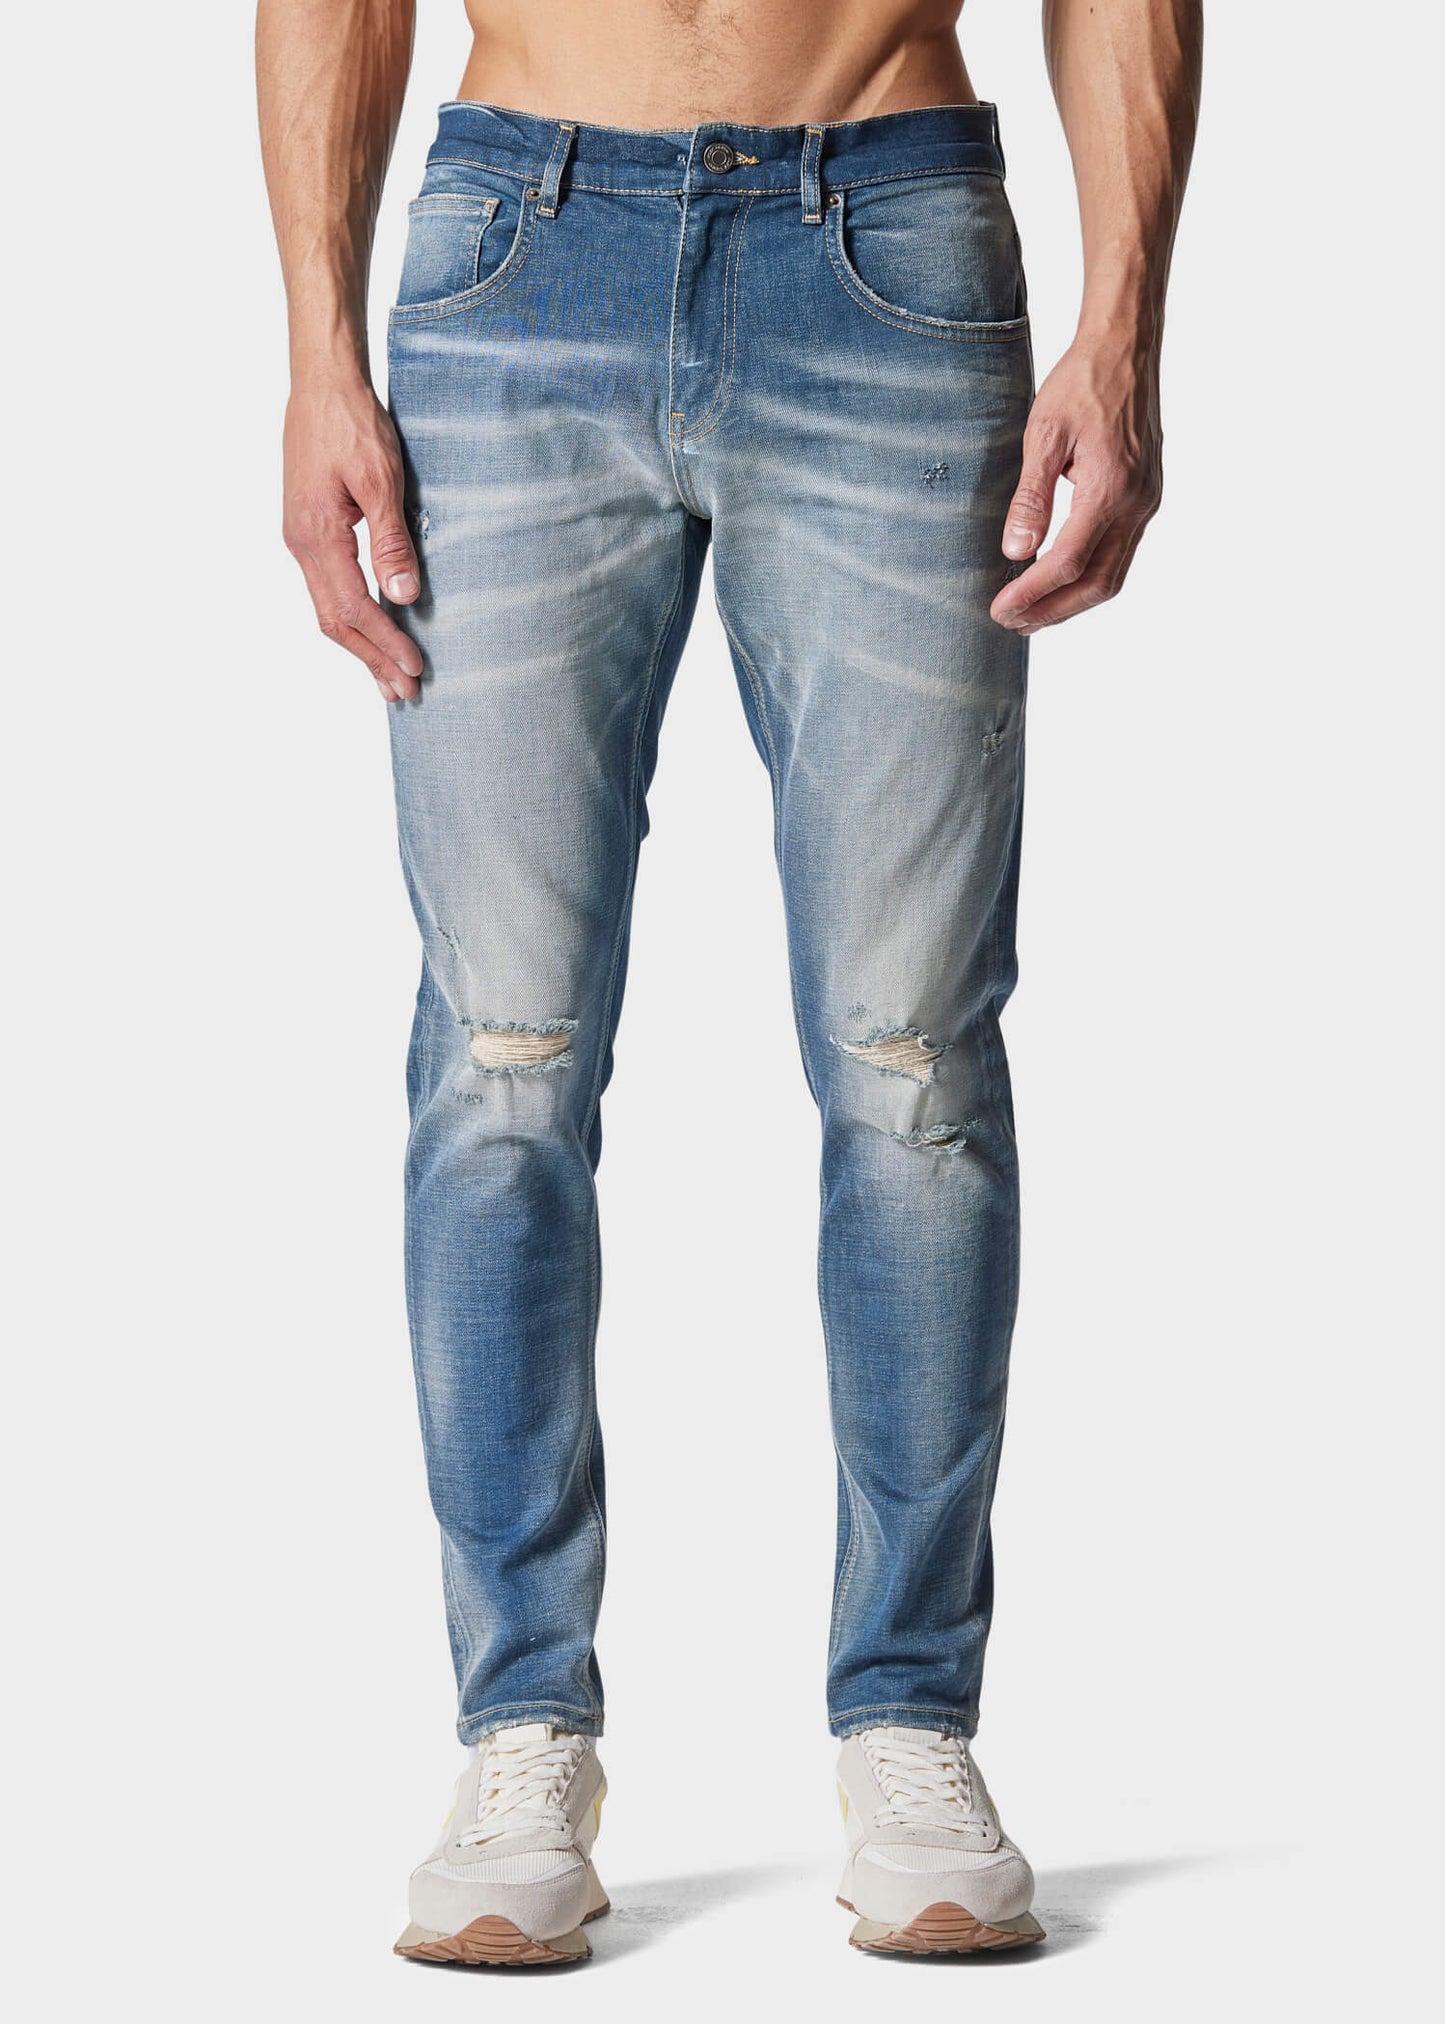 Moriarty COB 913 Slim Fit Jeans